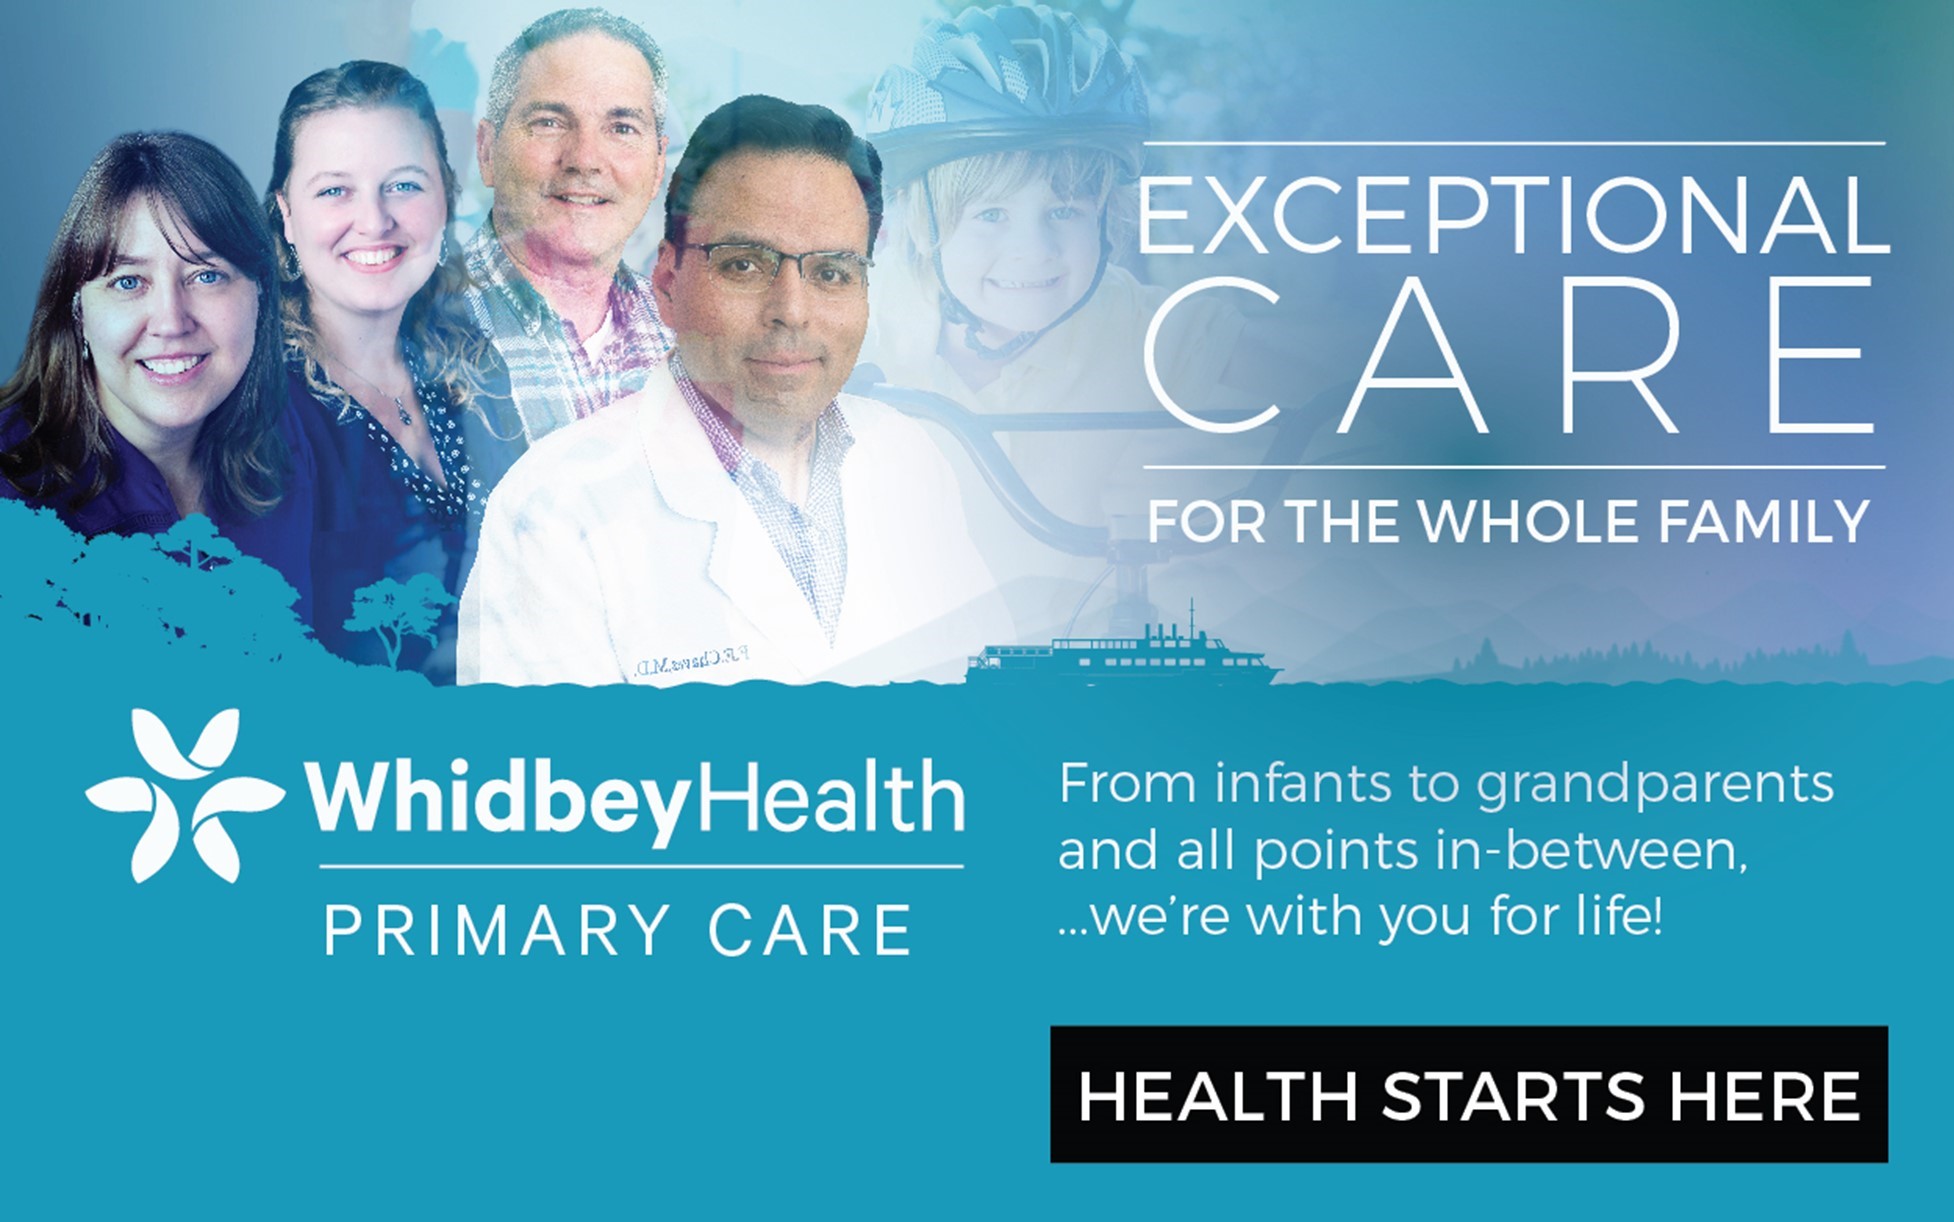 Whidbey Health